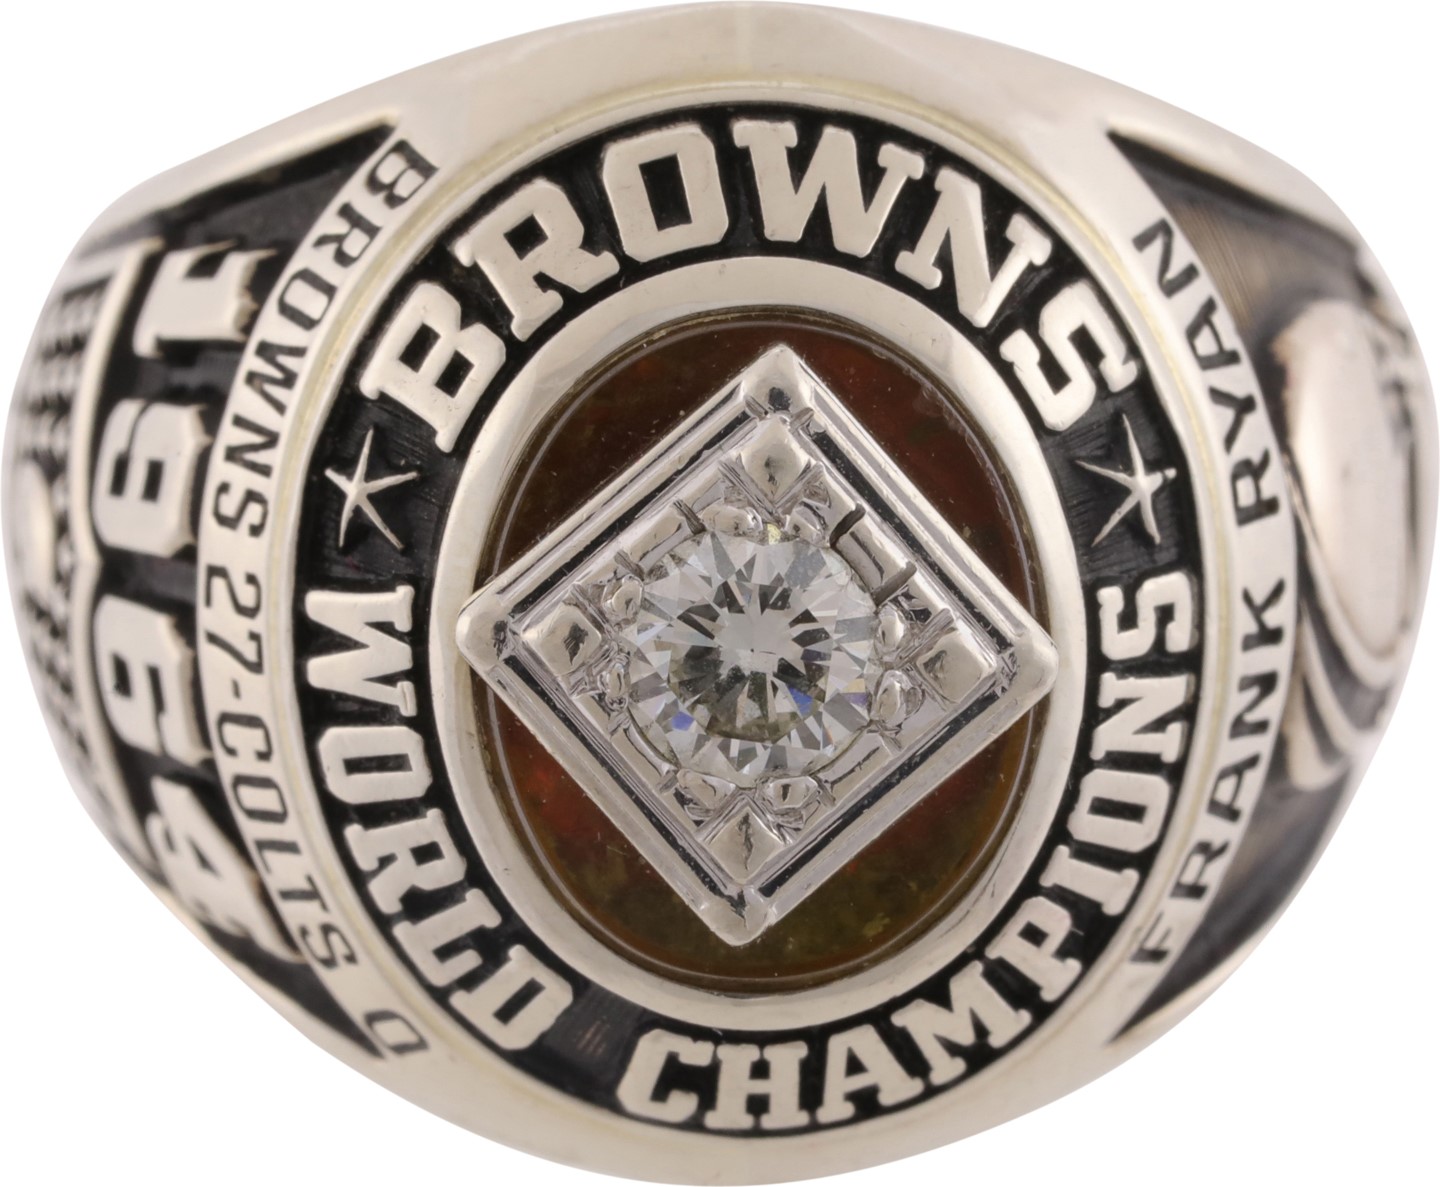 1964 browns